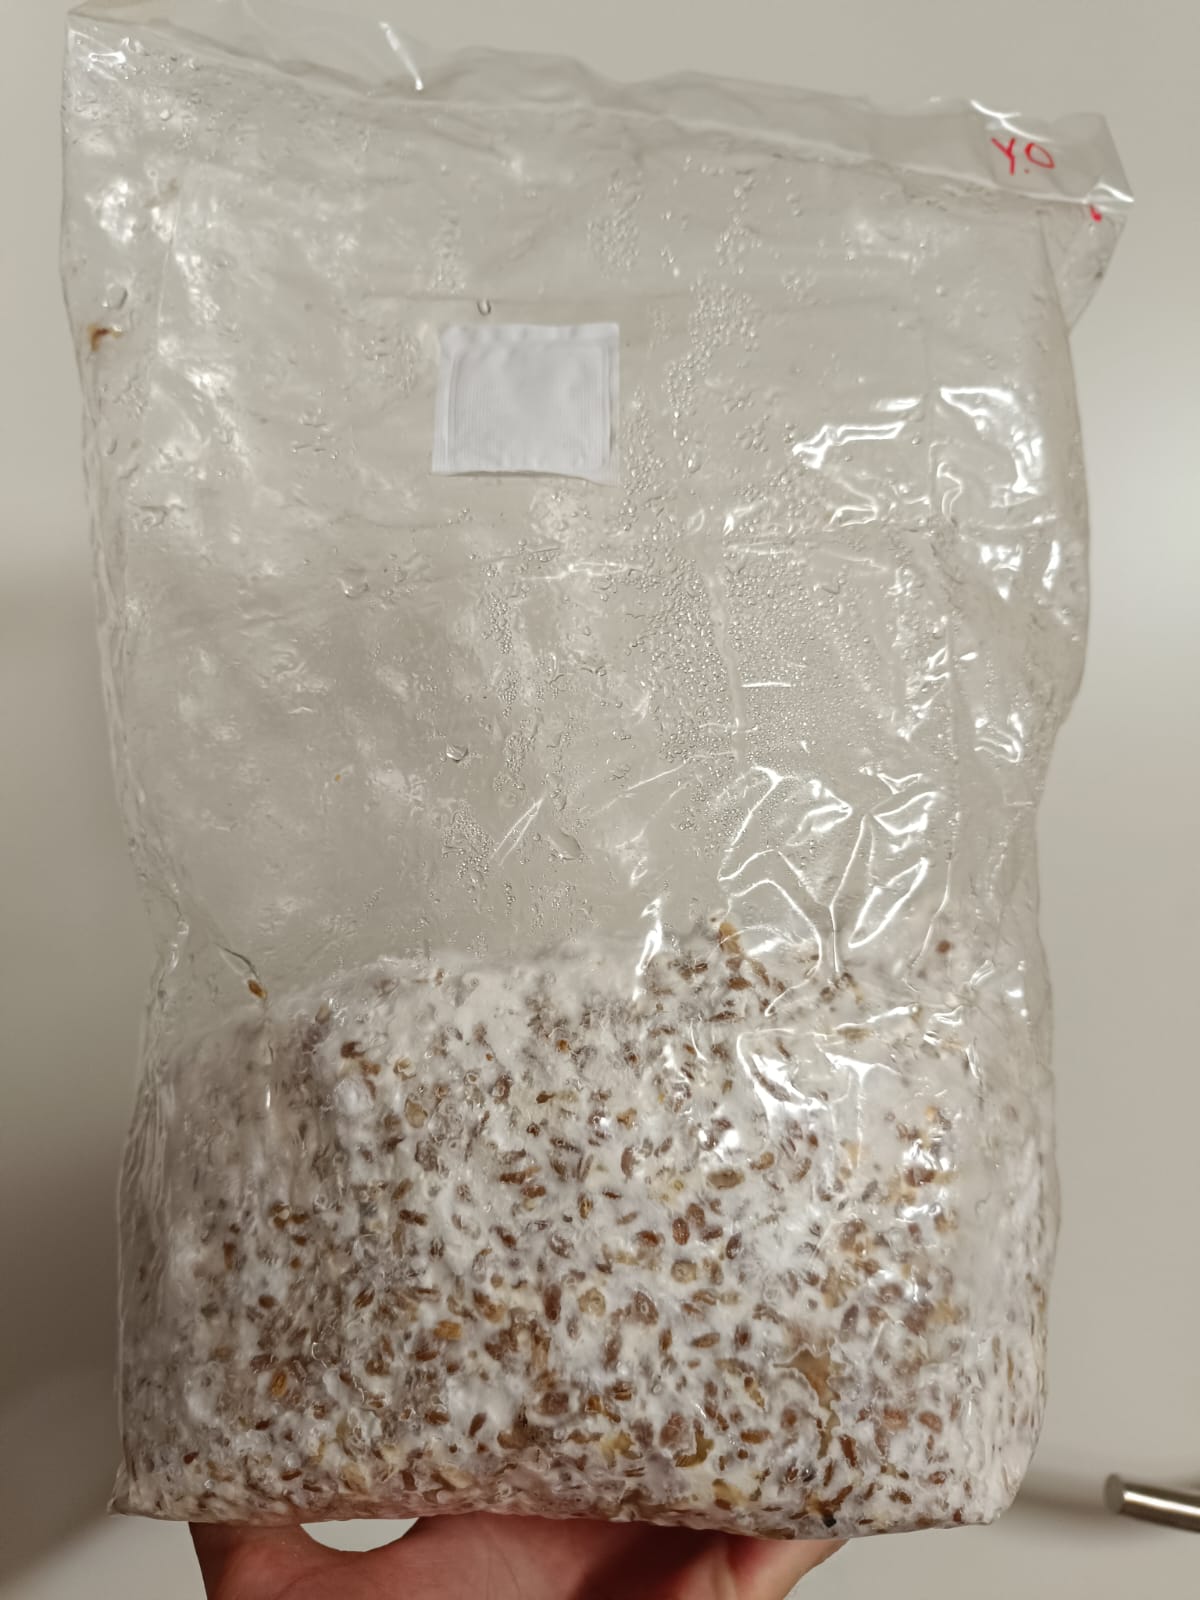 Transferring Spawn Bag to Bulk Substrate